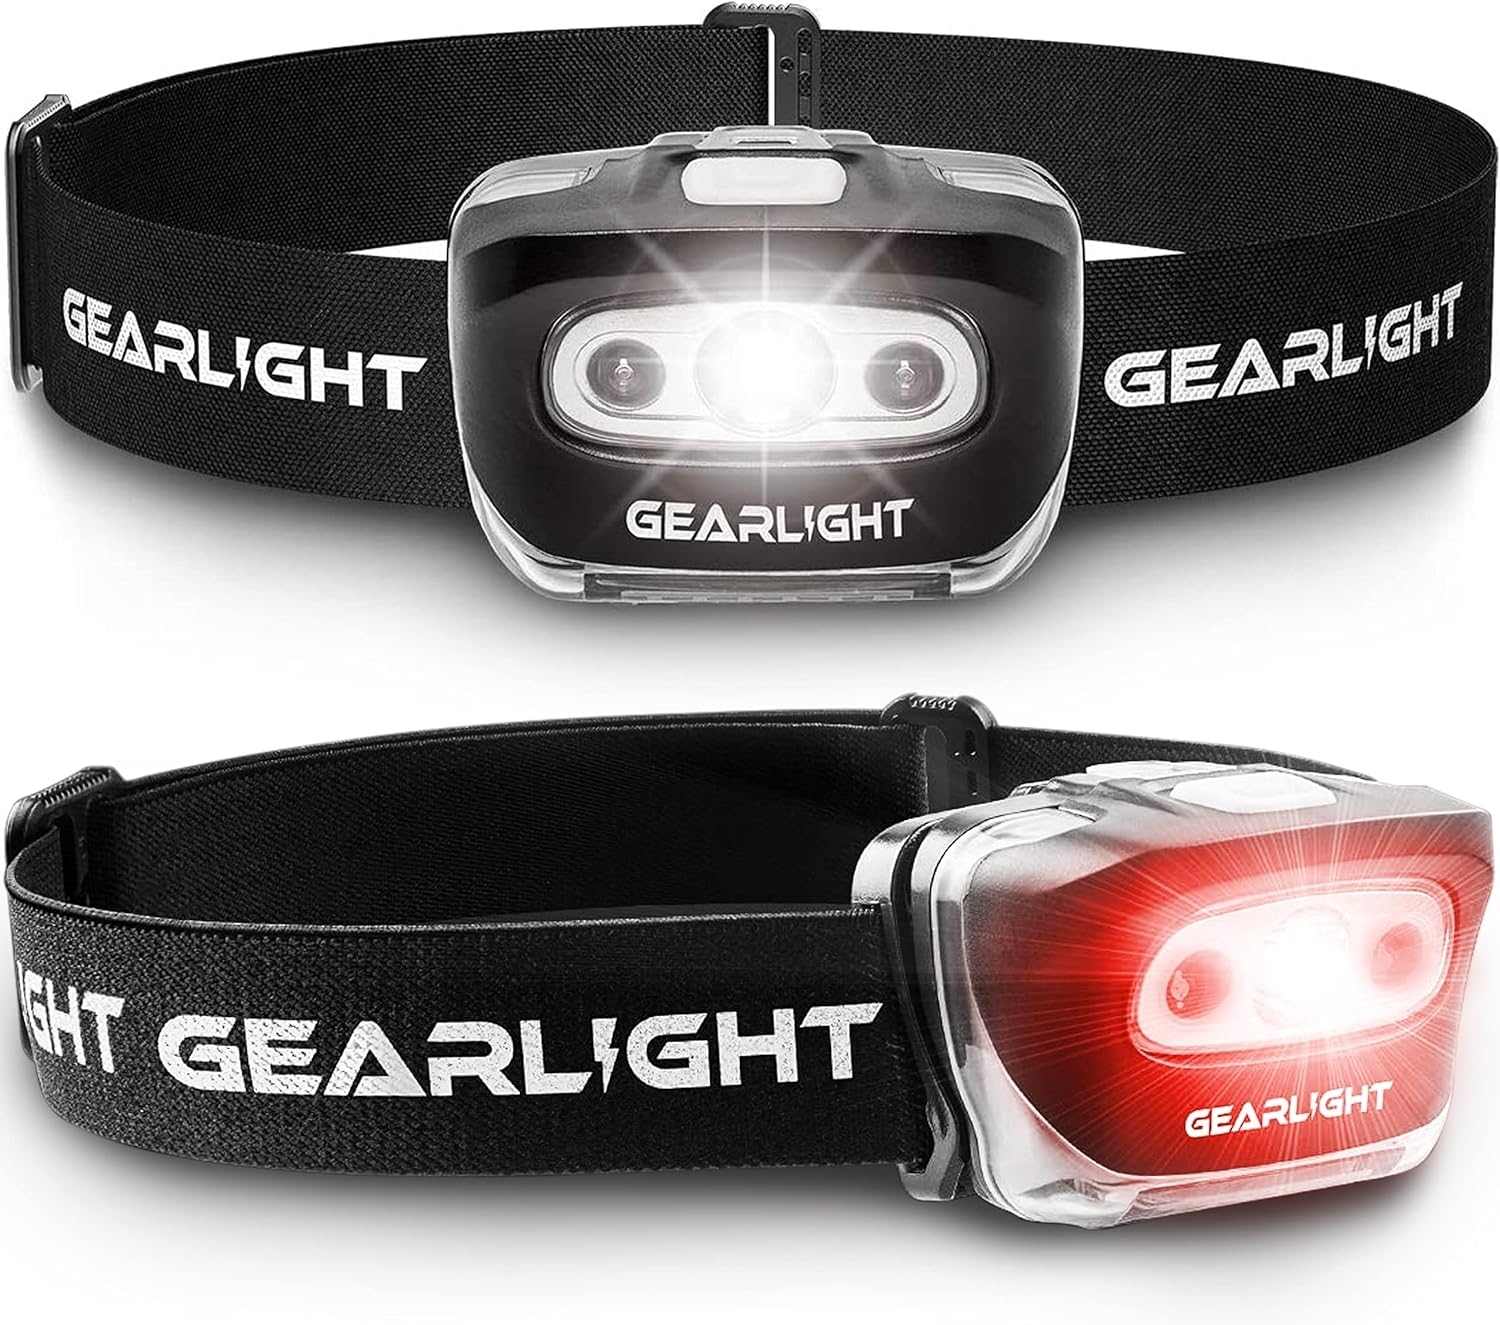 Two GearLight headlamps with adjustable straps, one with a white light, one with a red light